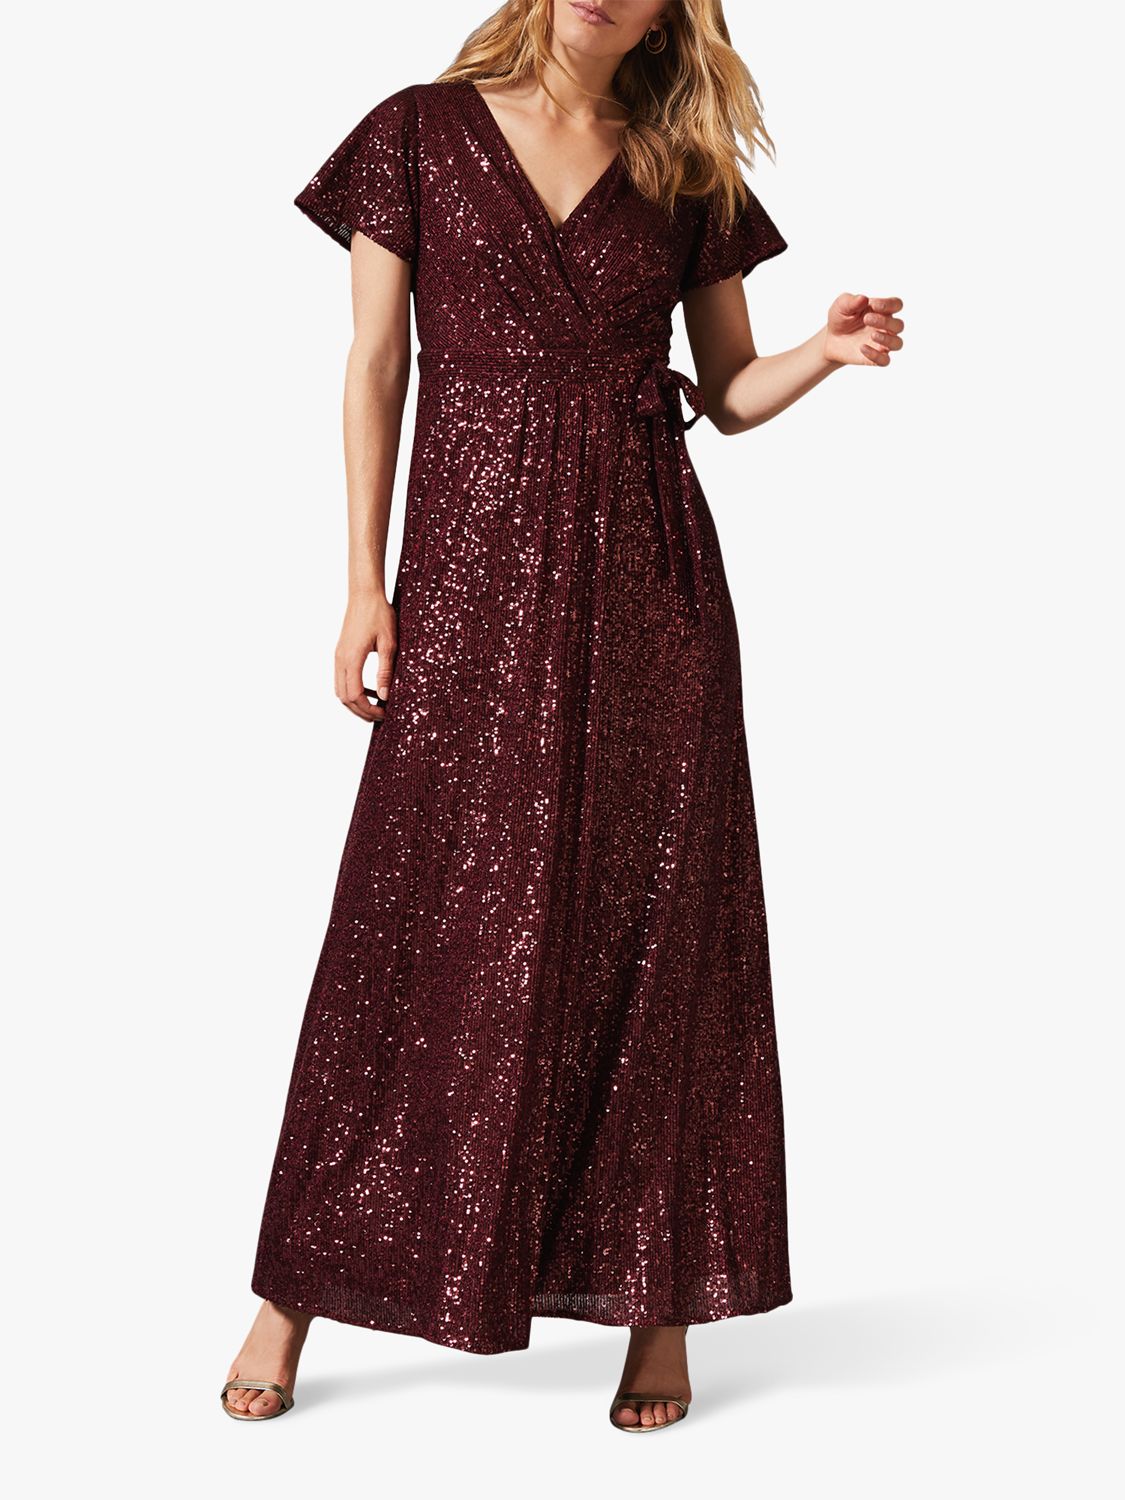 Phase Eight Amily Sequin Dress